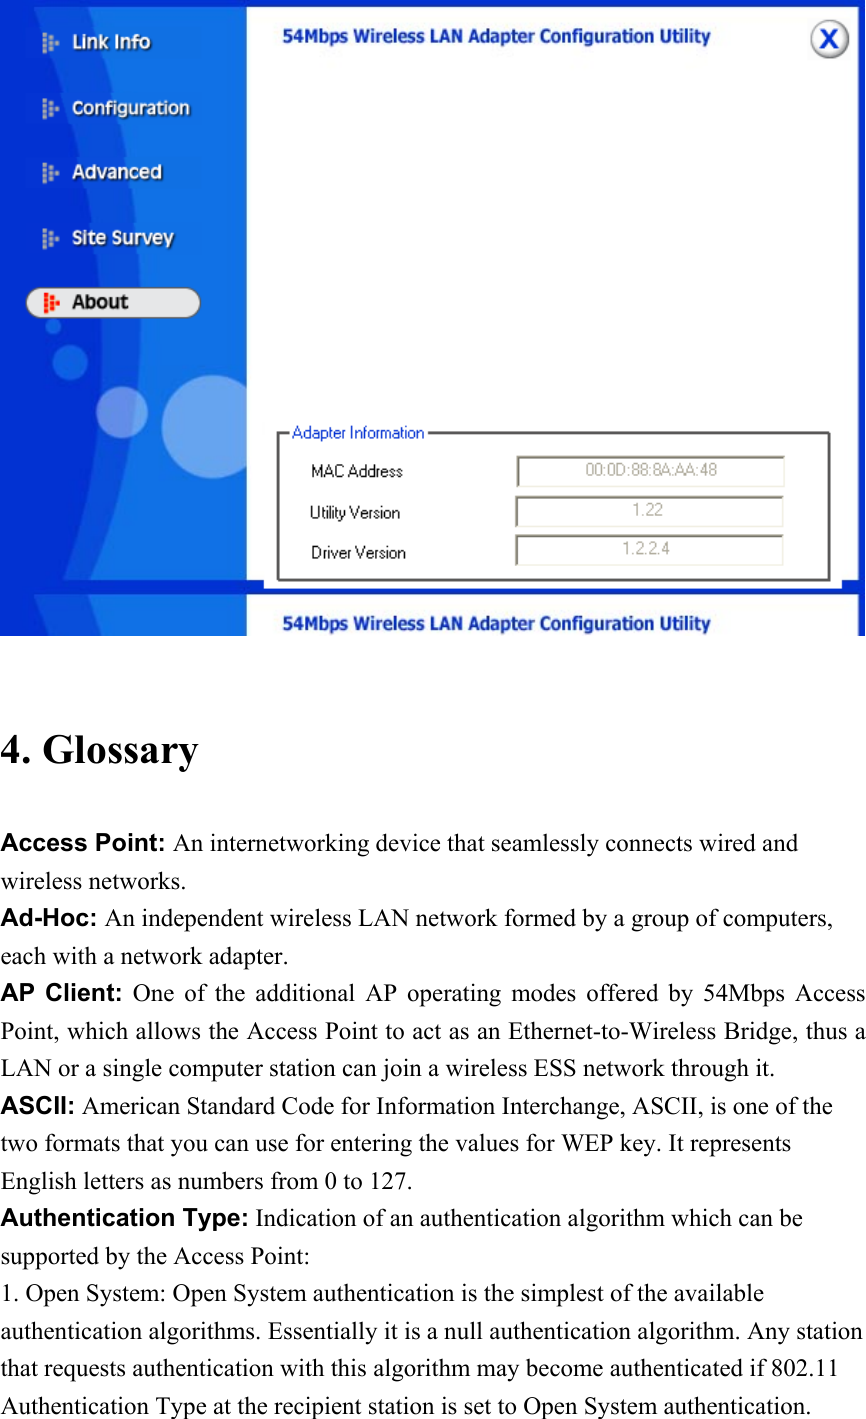   4. Glossary Access Point: An internetworking device that seamlessly connects wired and wireless networks. Ad-Hoc: An independent wireless LAN network formed by a group of computers, each with a network adapter. AP Client: One of the additional AP operating modes offered by 54Mbps Access Point, which allows the Access Point to act as an Ethernet-to-Wireless Bridge, thus a LAN or a single computer station can join a wireless ESS network through it. ASCII: American Standard Code for Information Interchange, ASCII, is one of the two formats that you can use for entering the values for WEP key. It represents English letters as numbers from 0 to 127. Authentication Type: Indication of an authentication algorithm which can be supported by the Access Point: 1. Open System: Open System authentication is the simplest of the available authentication algorithms. Essentially it is a null authentication algorithm. Any station that requests authentication with this algorithm may become authenticated if 802.11 Authentication Type at the recipient station is set to Open System authentication. 